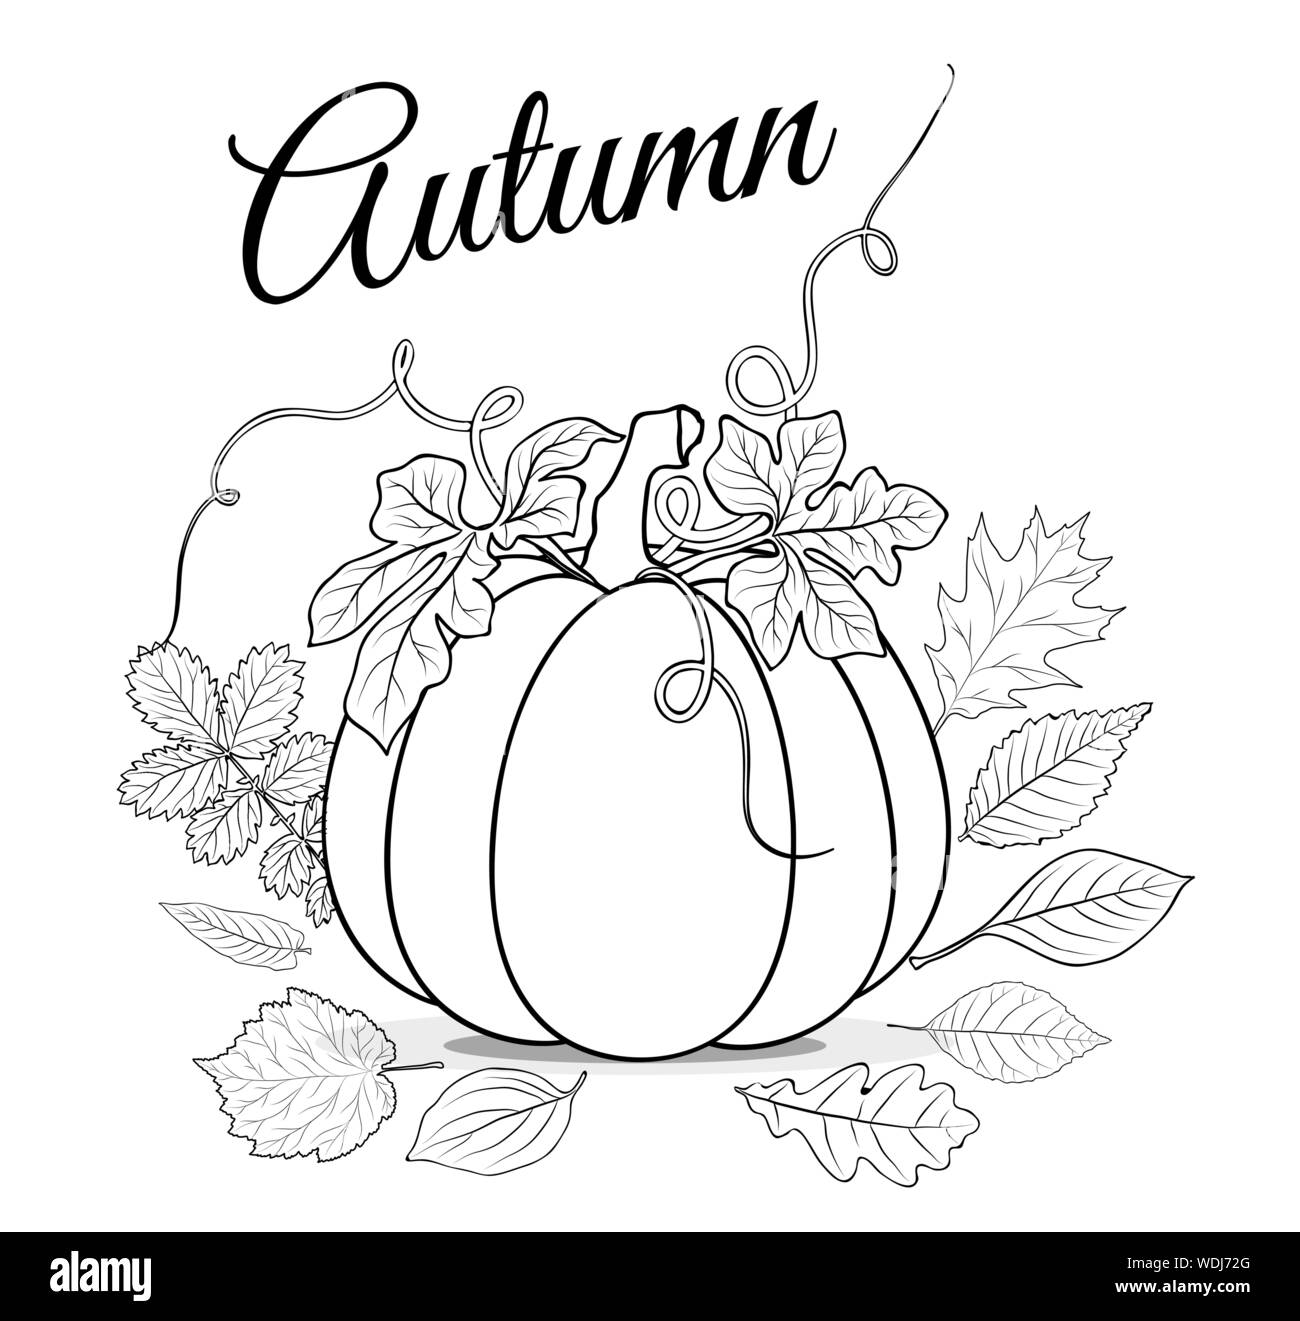 Autumn background with pumpkin and leaves for coloring book vector stock vector image art